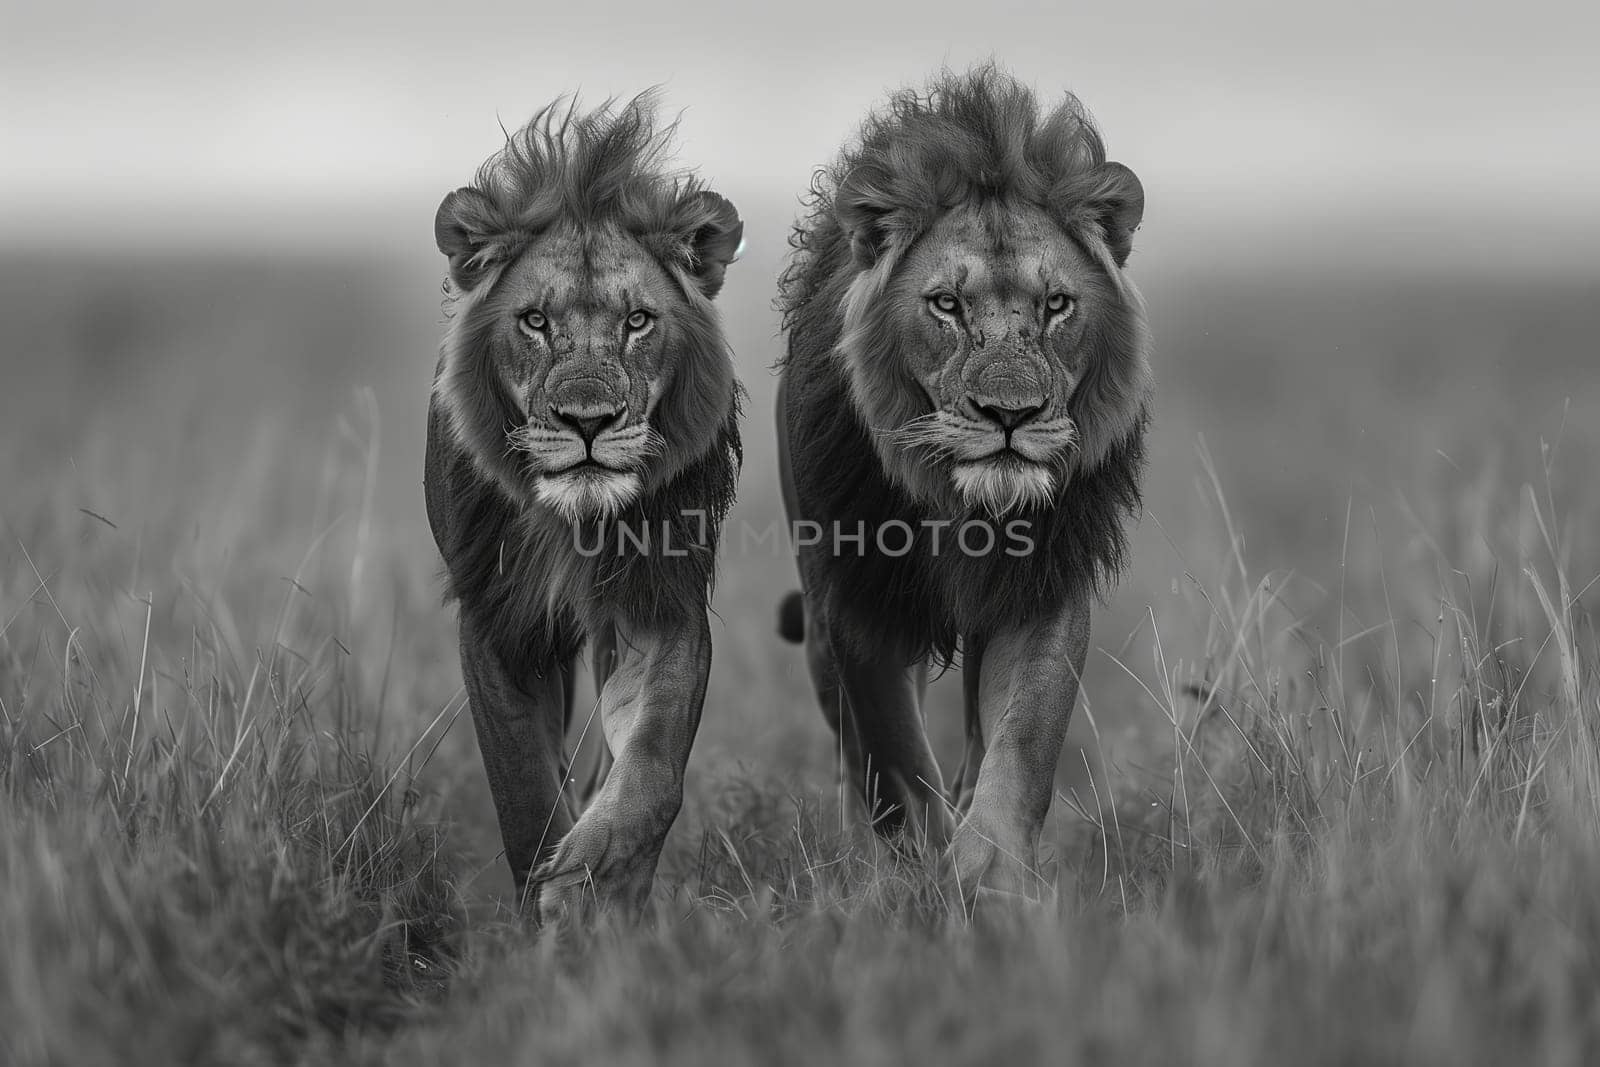 Two Masai lions, large Felidae carnivores with whiskers, are walking in the grass in a black and white photo. They are formidable terrestrial animals and big cats